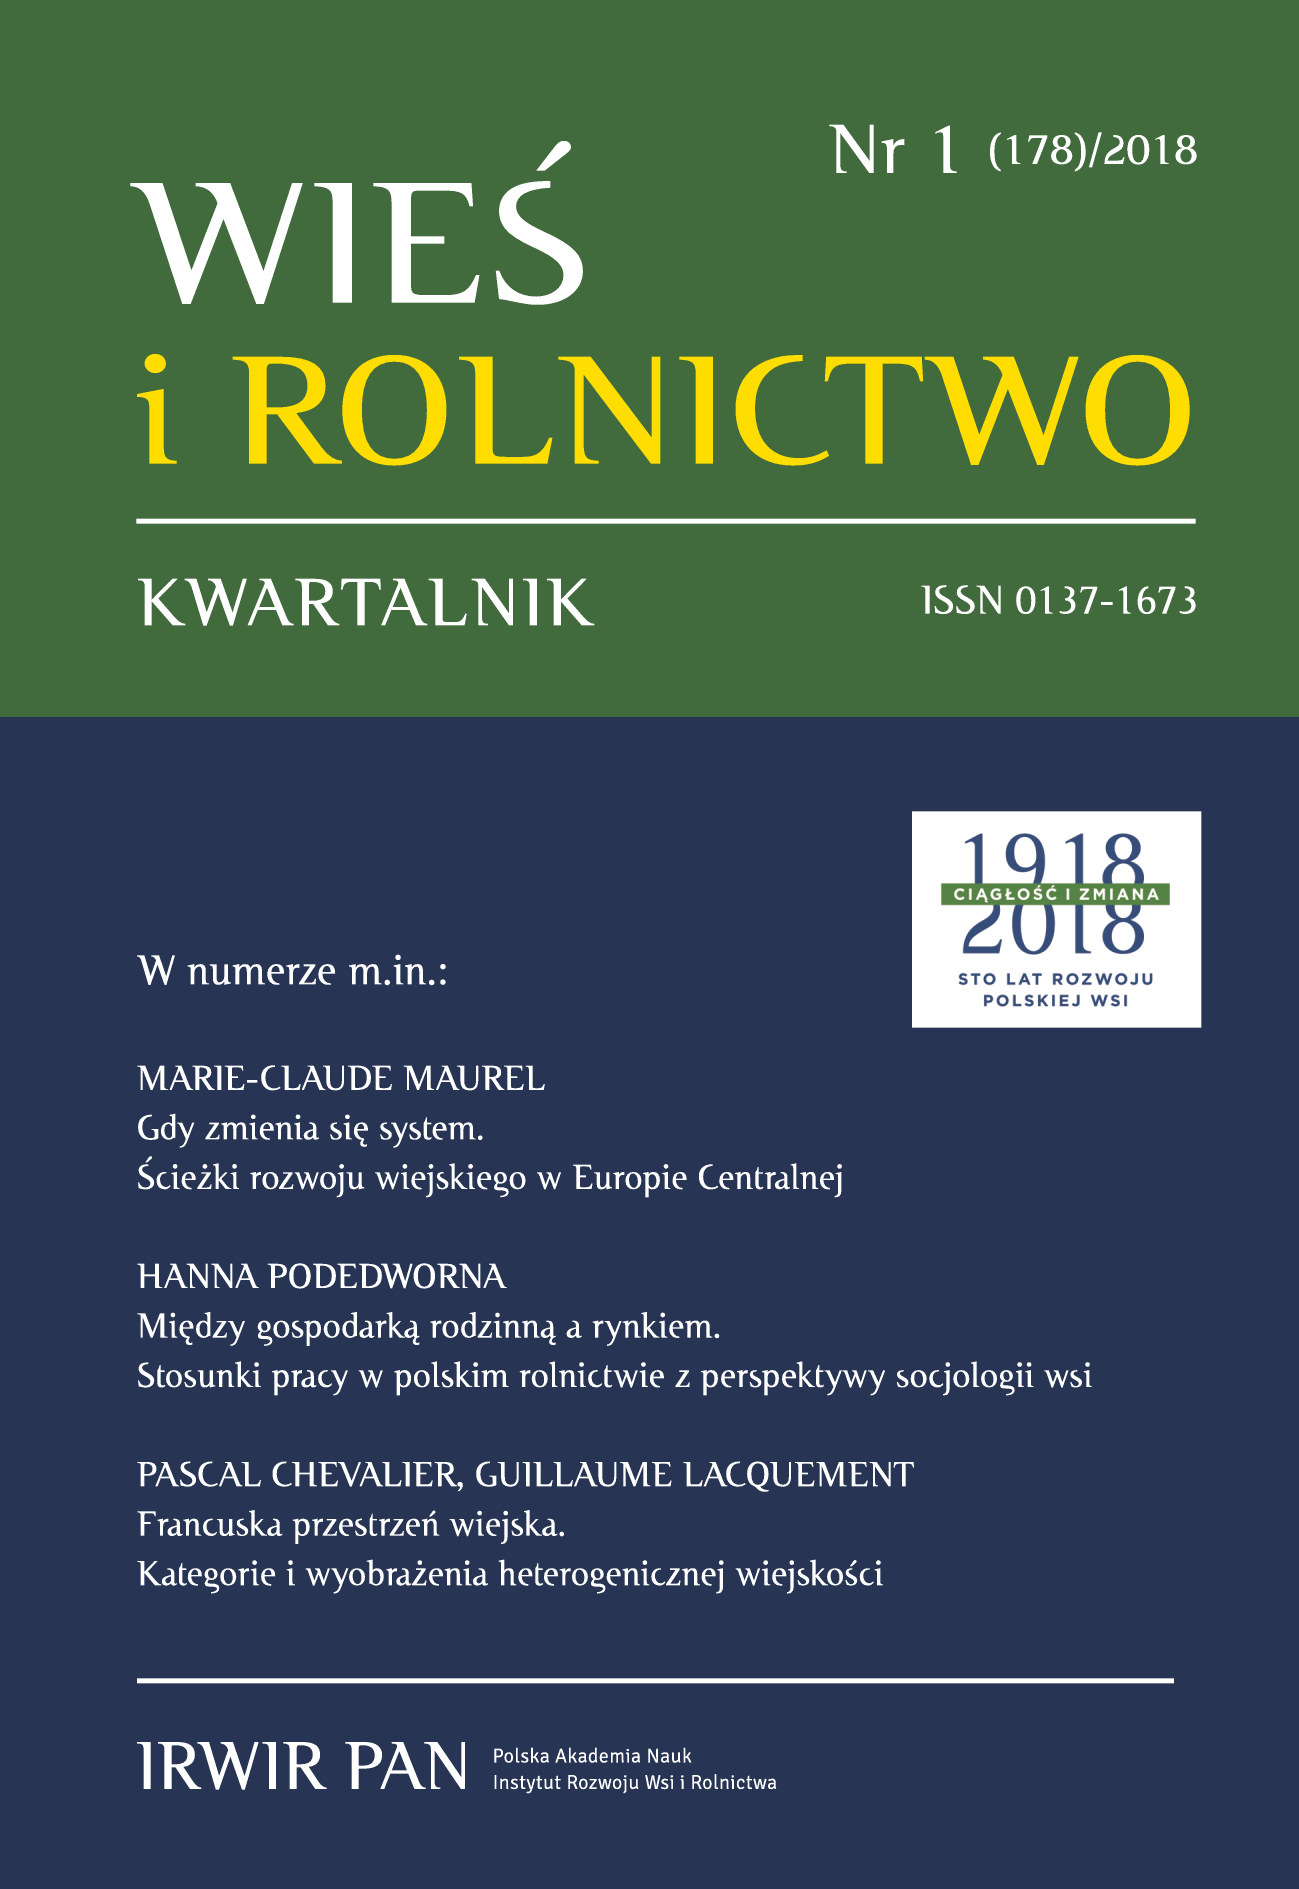 Scientific project "The Continuity and the change. One hundred years of the development of the Polish village". Development carried by the Institute of Rural and Agricultural Development - information and the invitation Cover Image